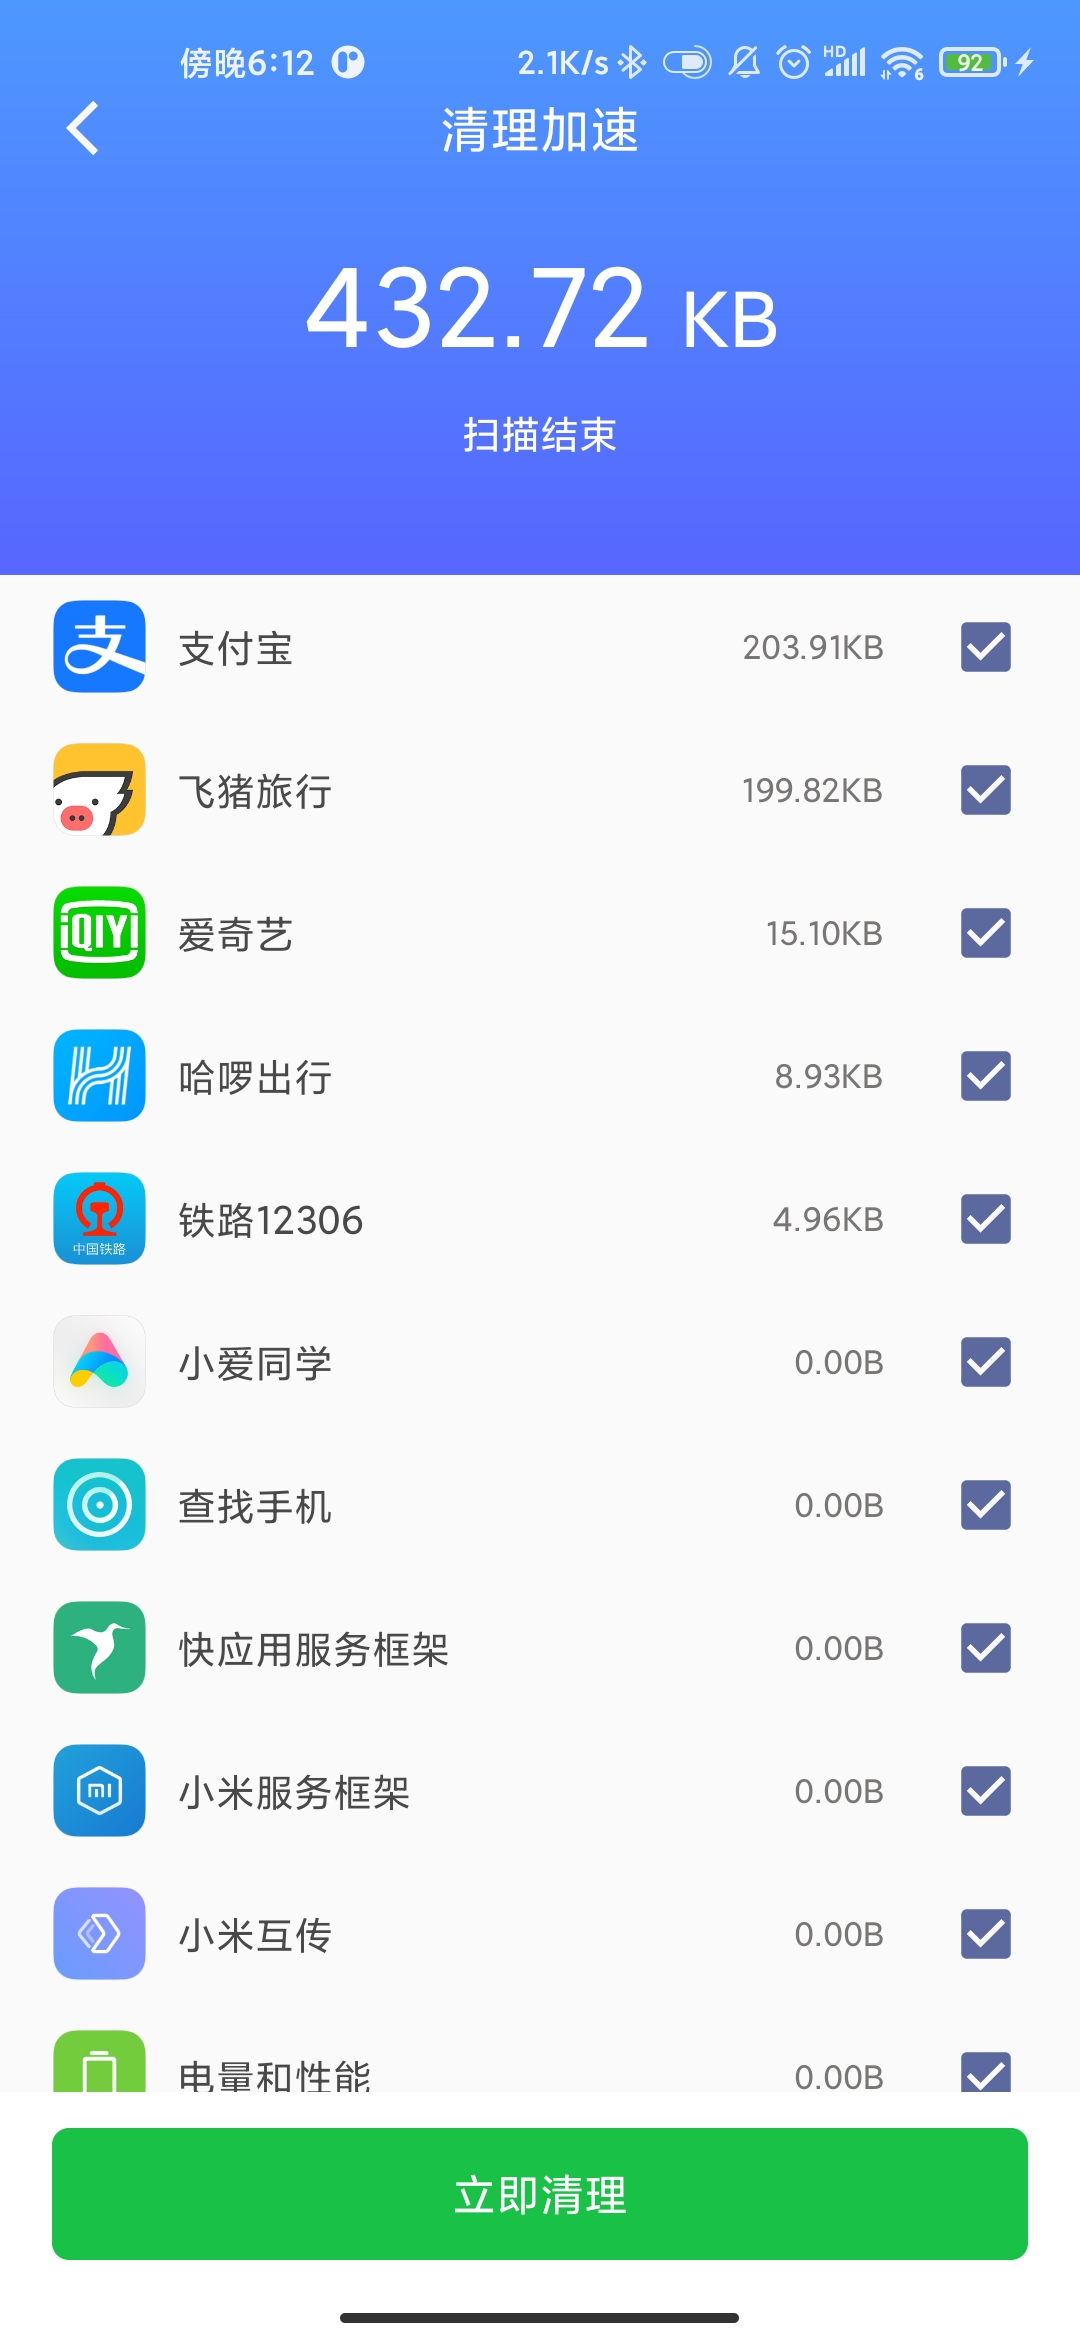 Android11适配-实现清理其他应用缓存目录 - 文章图片